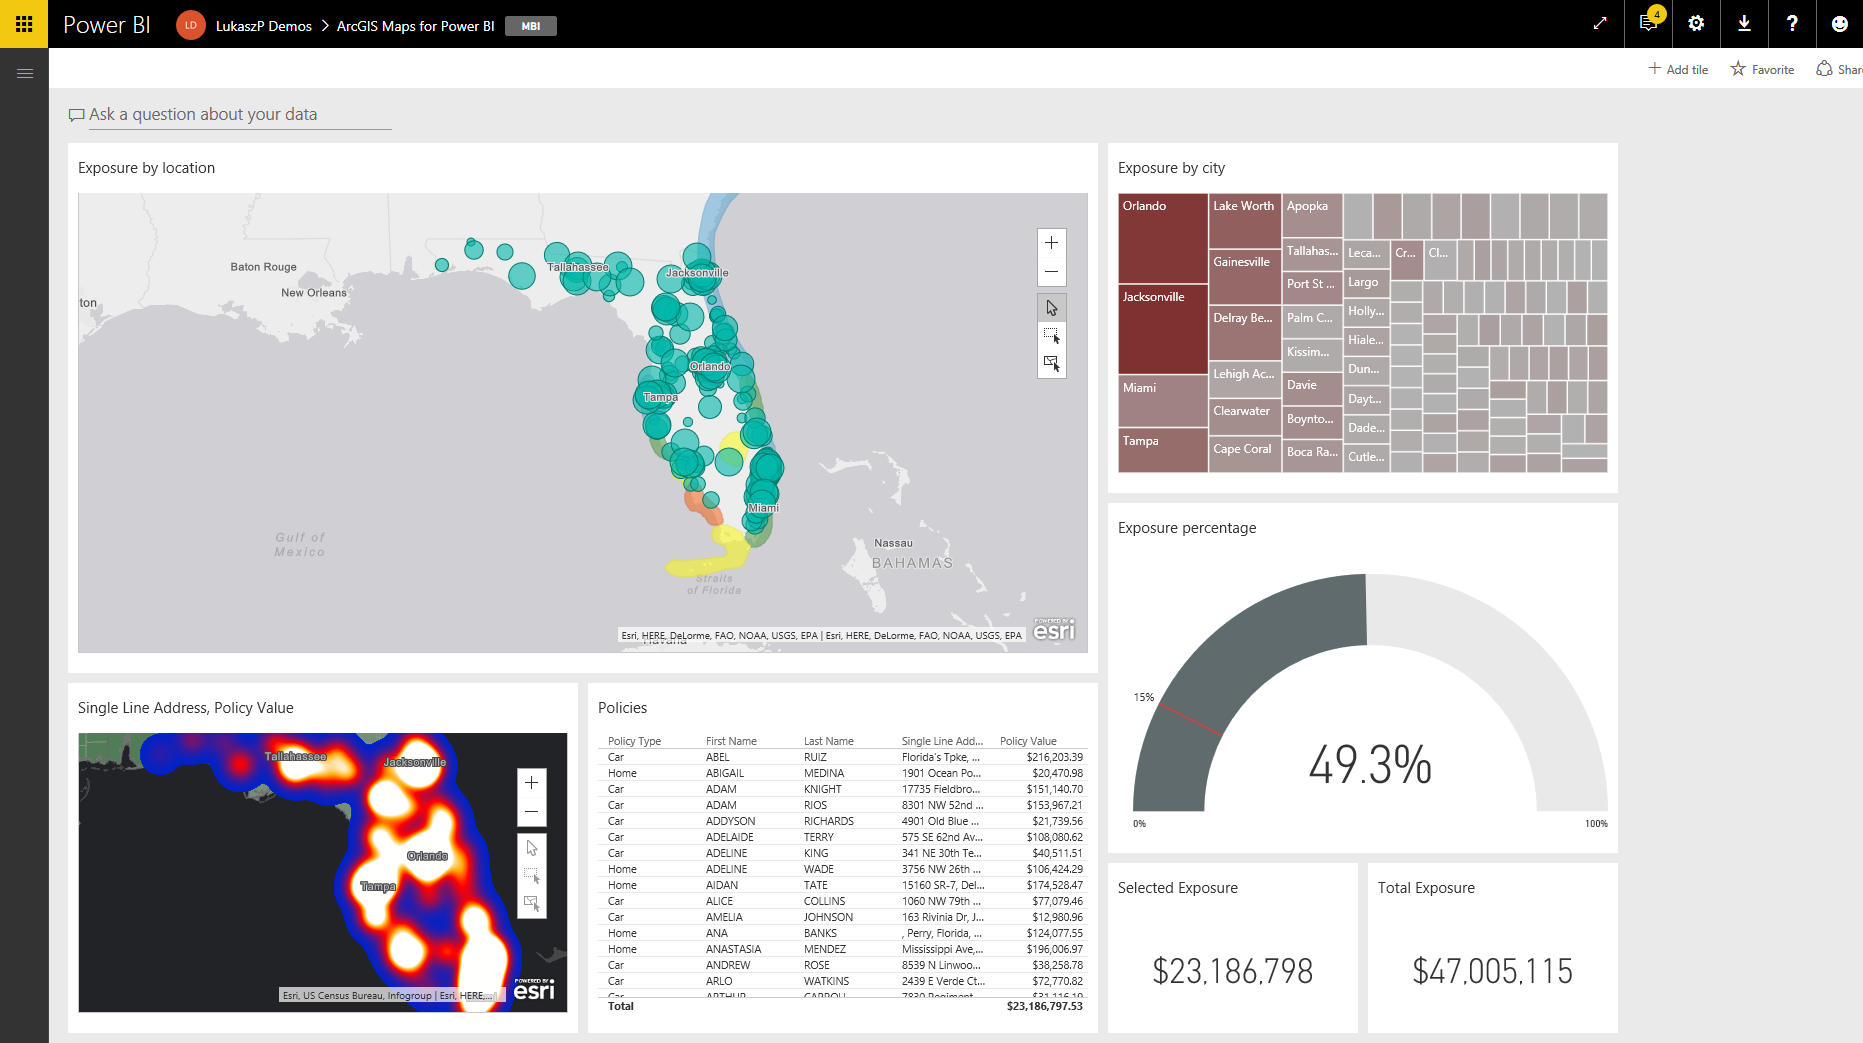 ArcGIS Maps for Power BI now available in the Power BI service